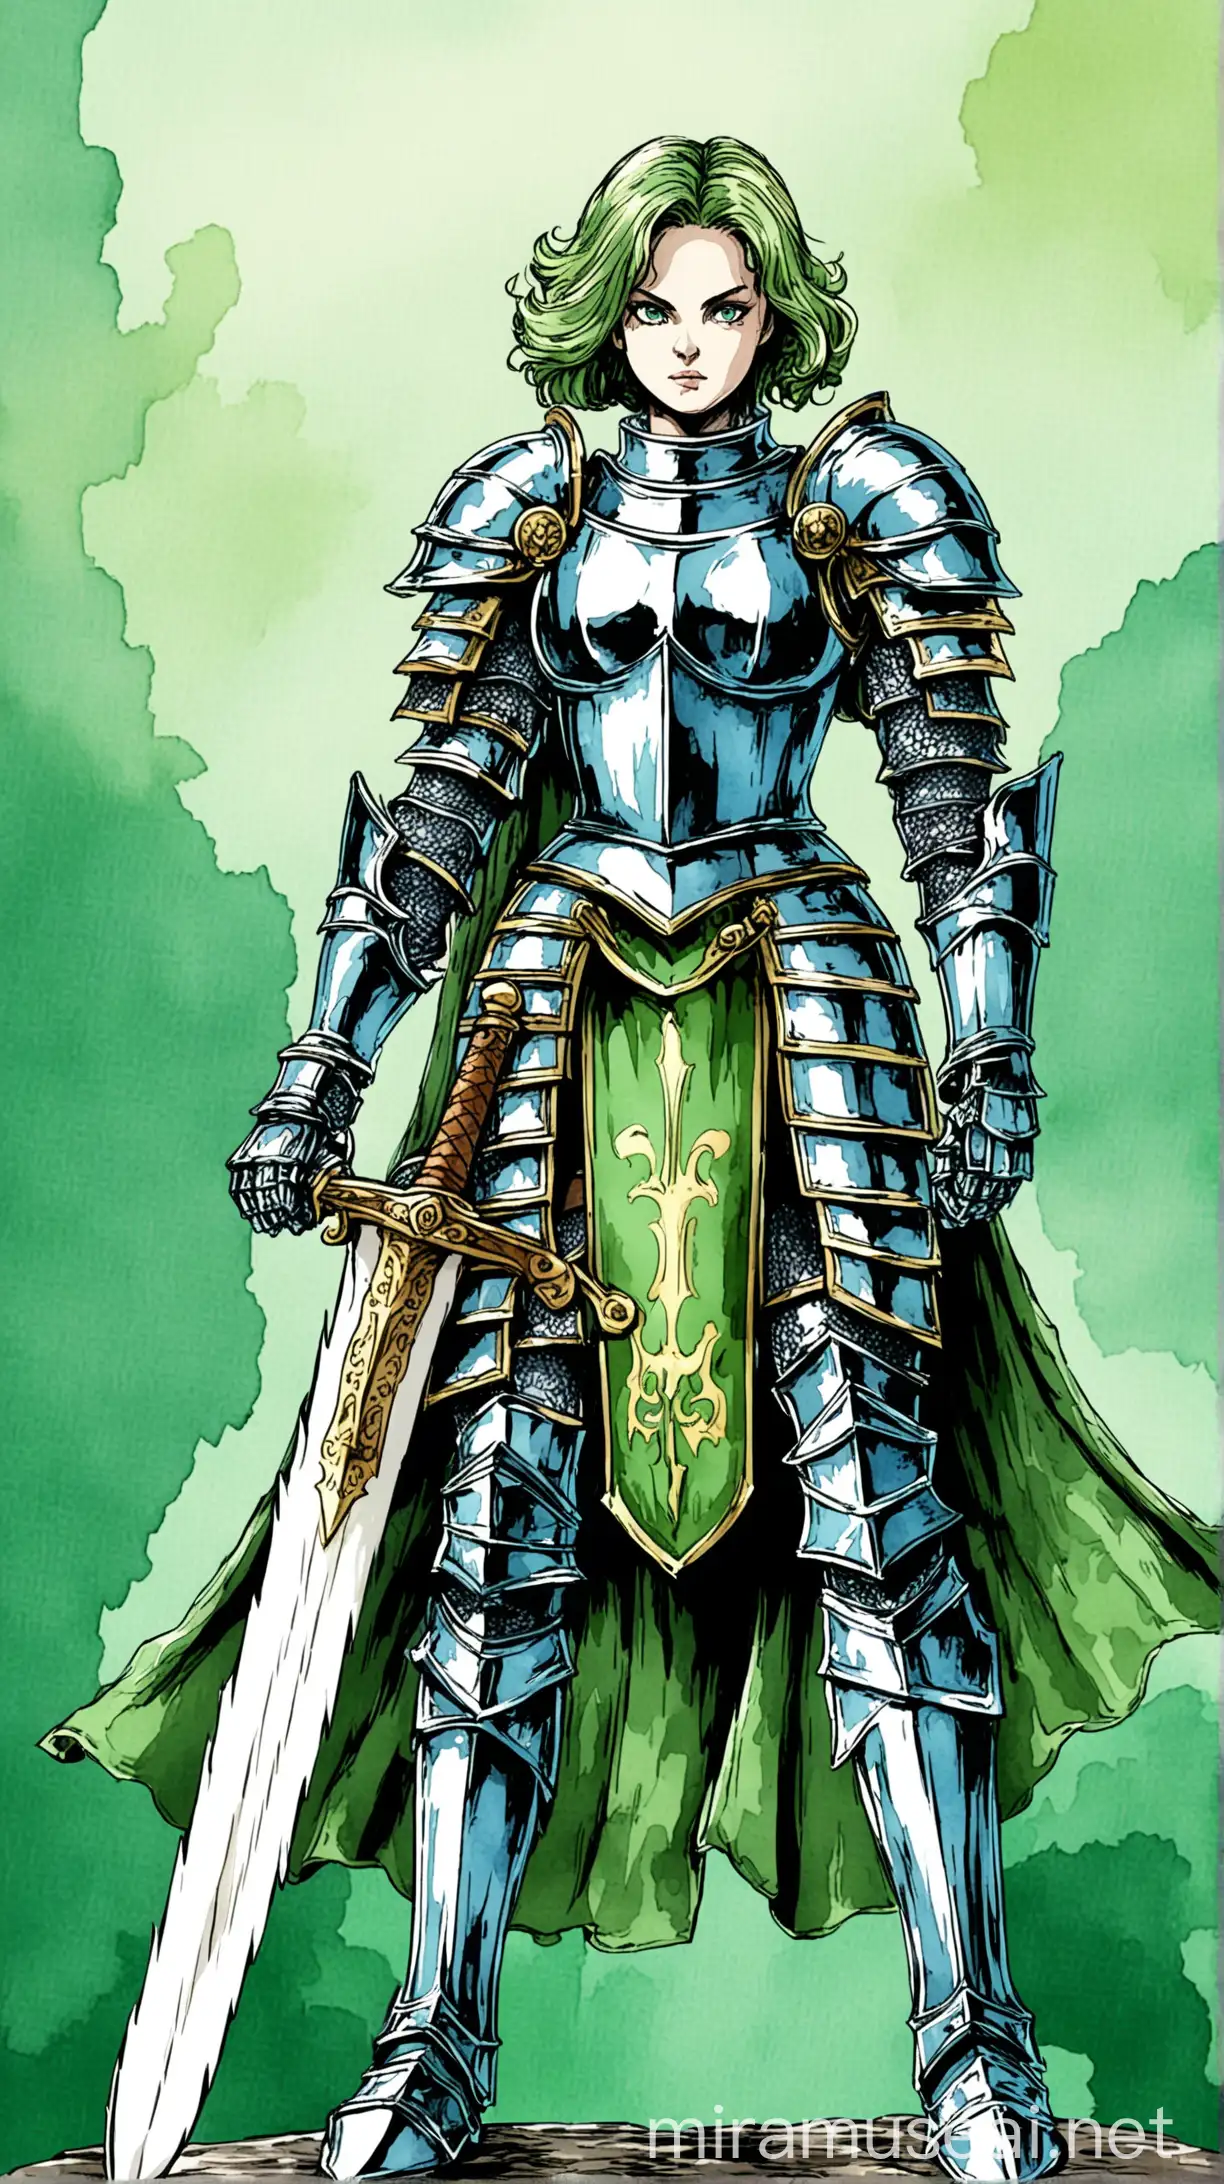 Subject: The central focus of the image is a female knight with a giant sword.
Background: blue-green background painted in watercolor
Style/Coloring: Colors adds depth and richness to the scene. Textures and shadows make the picture more detailed. JoJo reference. 